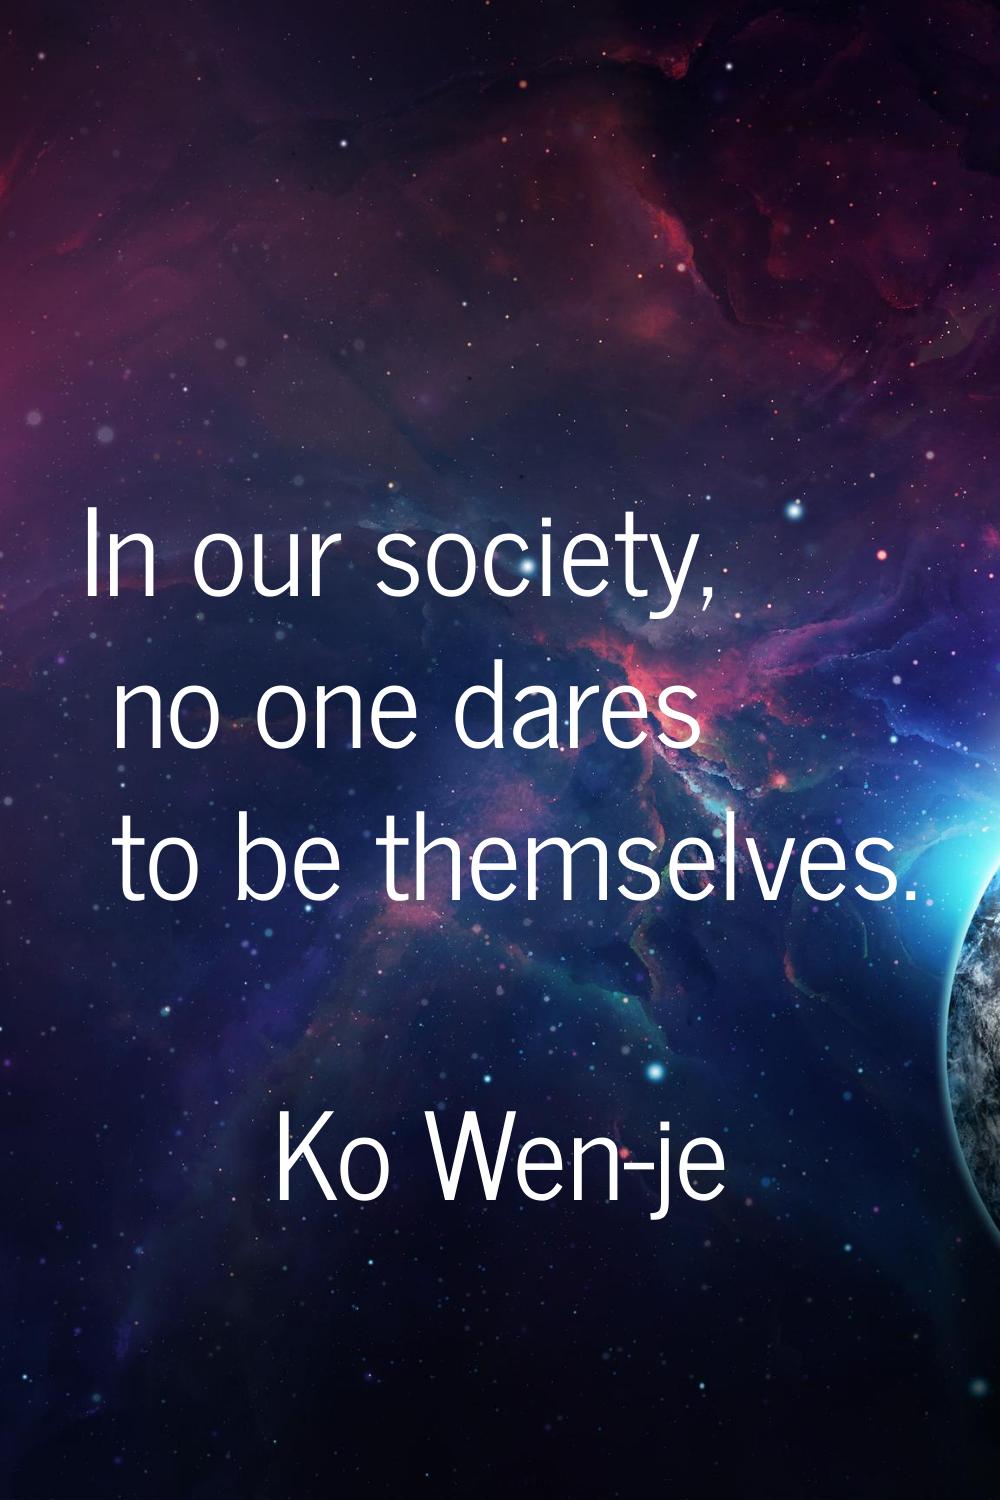 In our society, no one dares to be themselves.